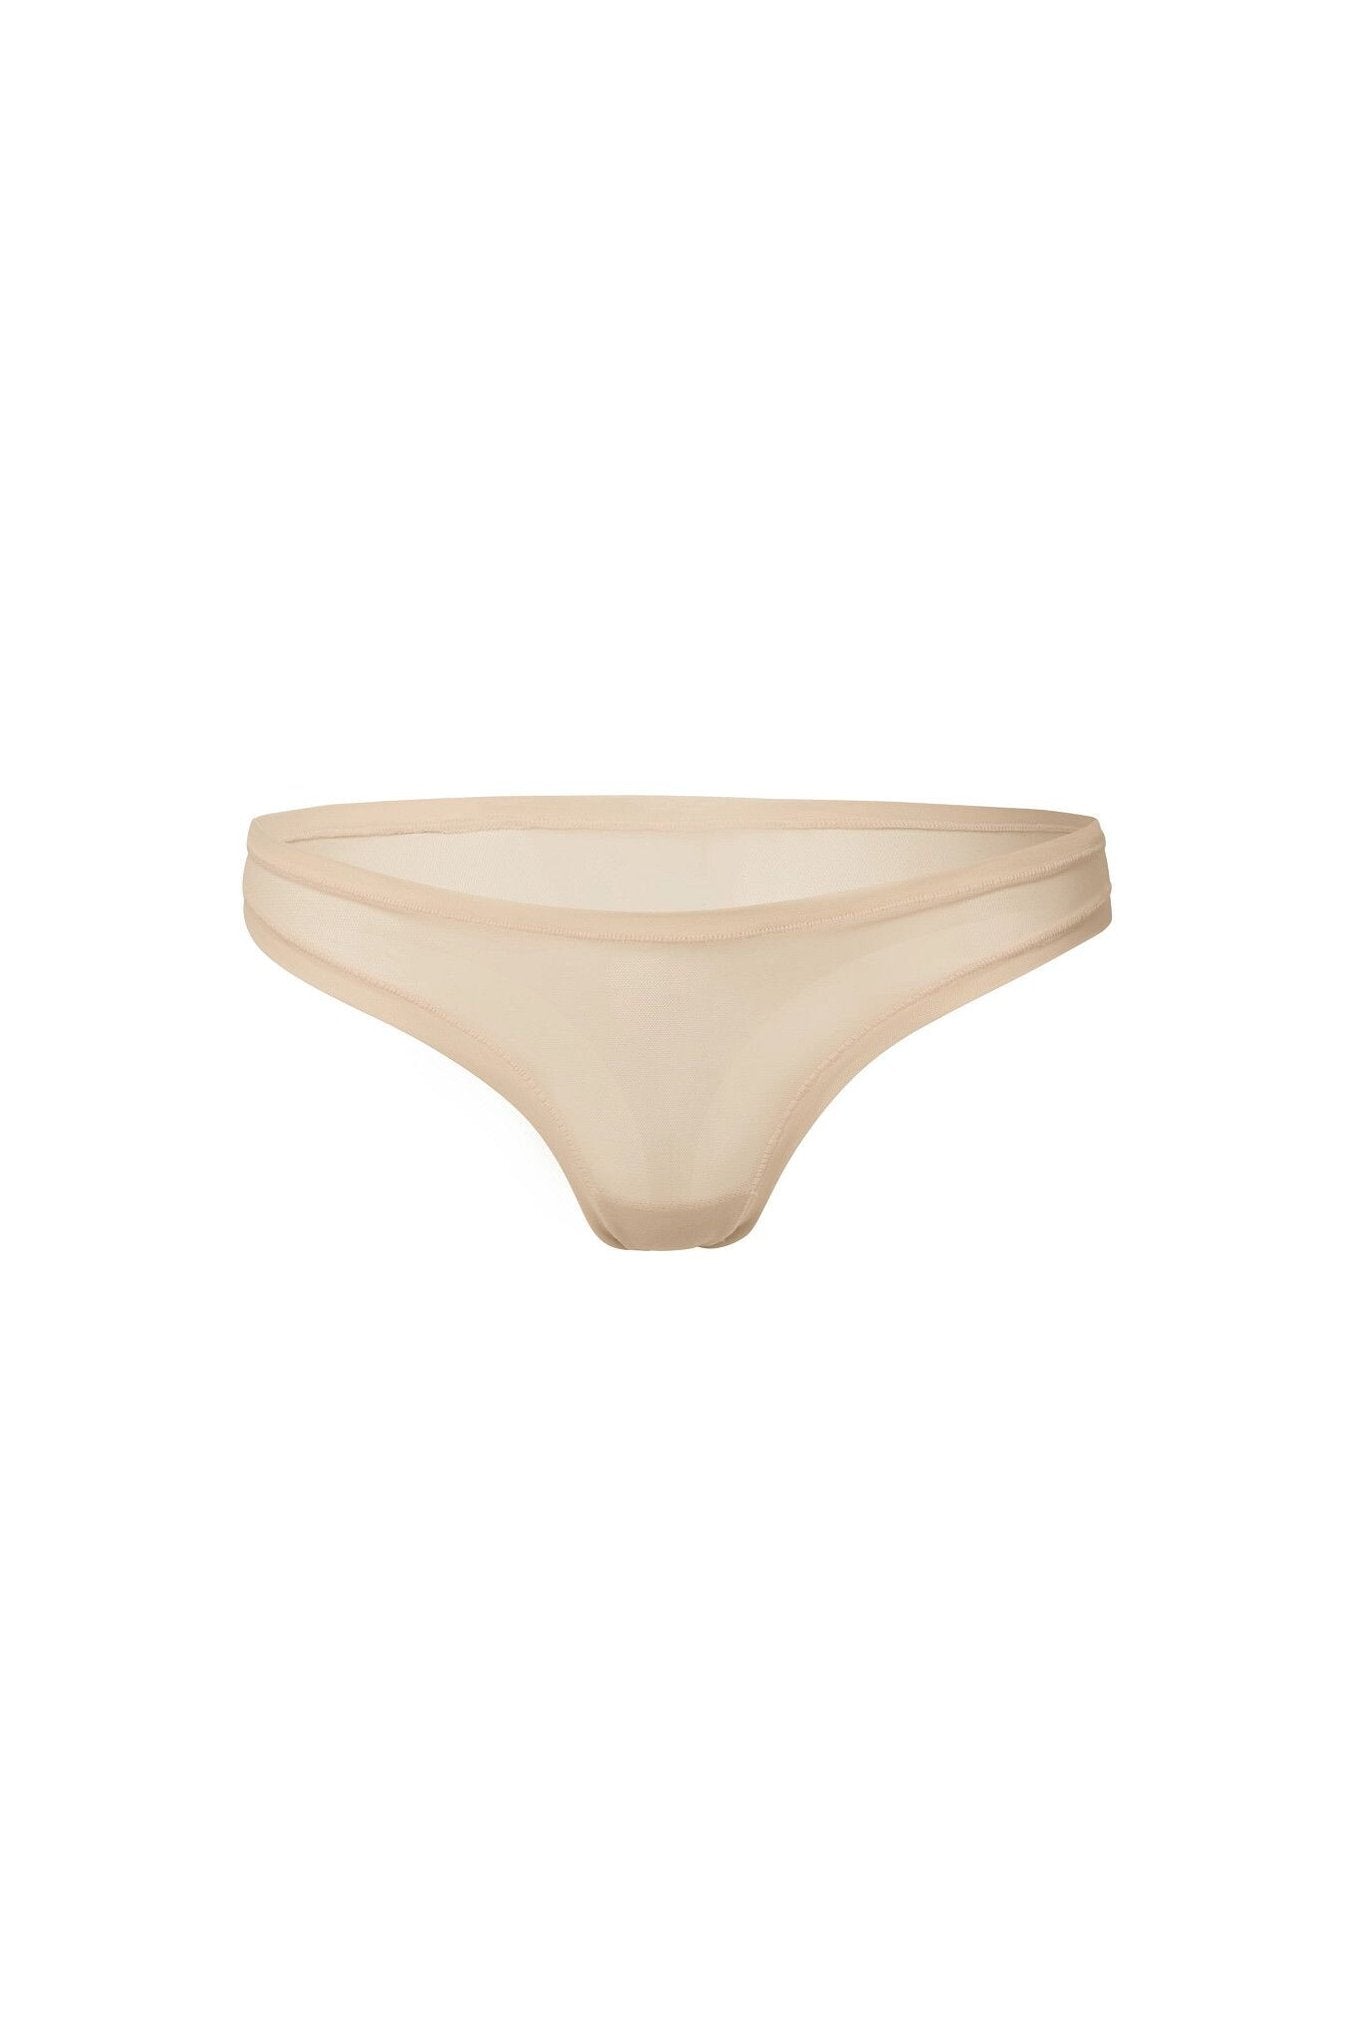 nueskin Bonnie Mesh Low-Rise Thong in color Dawn and shape thong